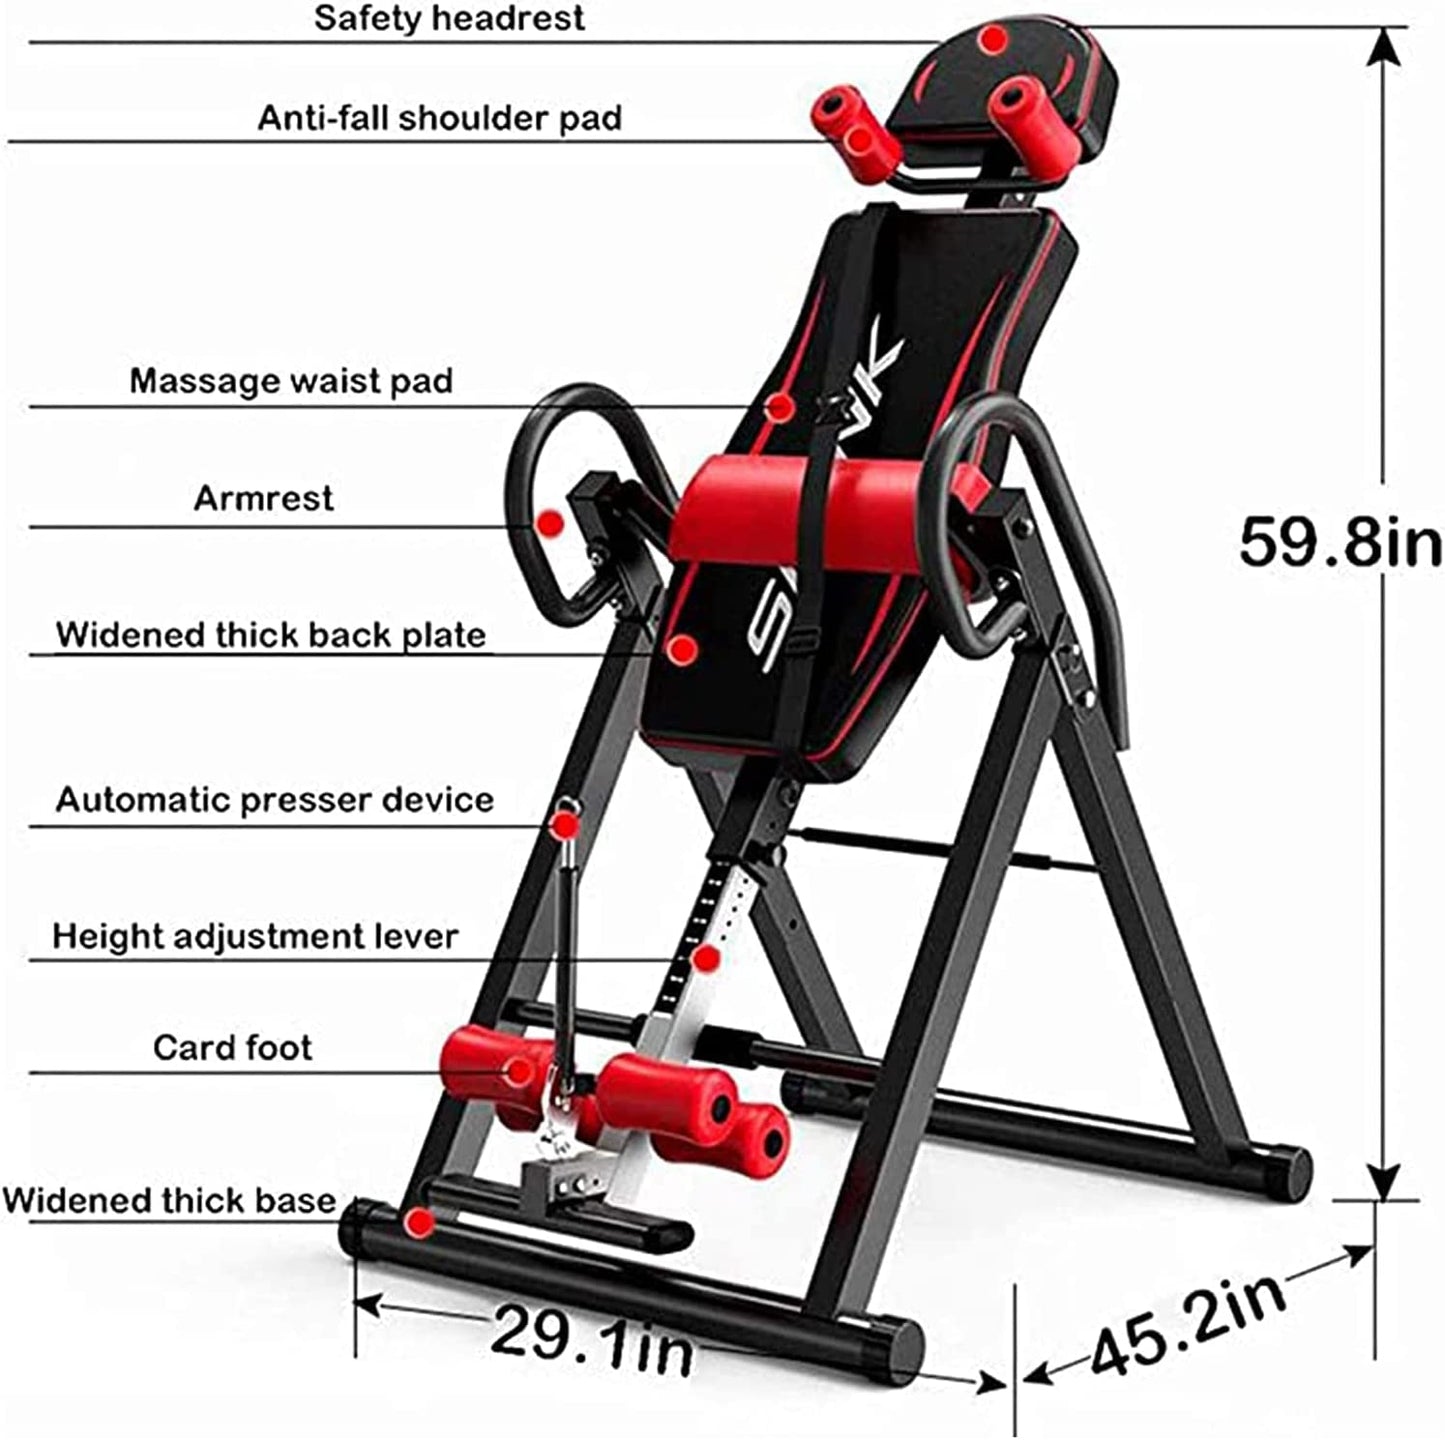 X MAXSTRENGTH Gravity Heavy Duty Inversion Table, Back Stretcher Machine for Pain Relief Therapy